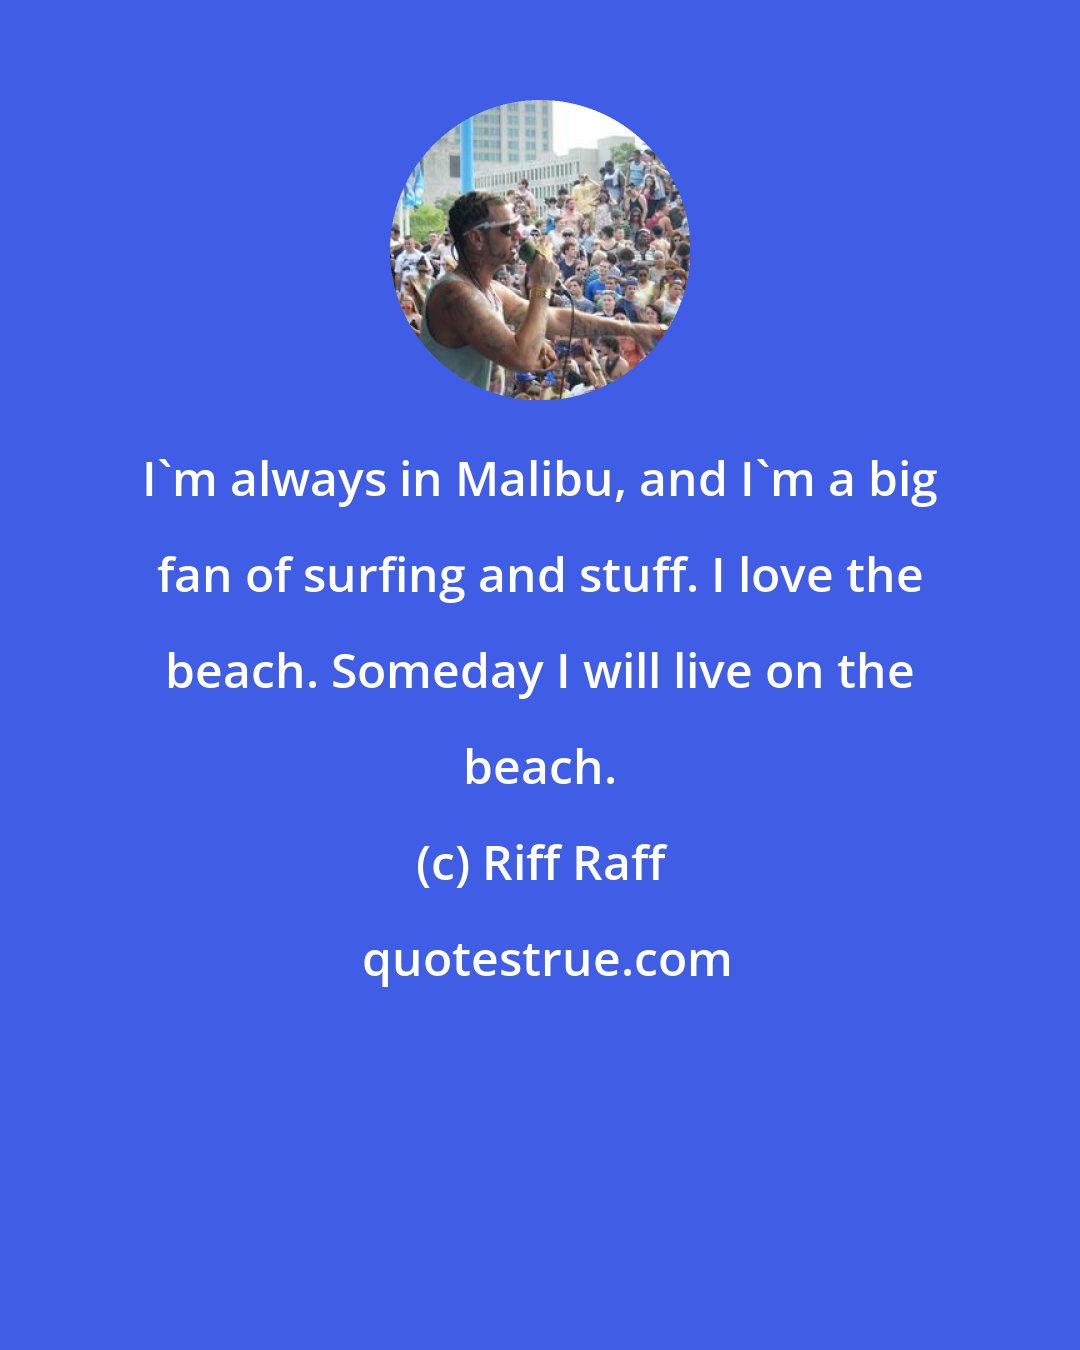 Riff Raff: I'm always in Malibu, and I'm a big fan of surfing and stuff. I love the beach. Someday I will live on the beach.